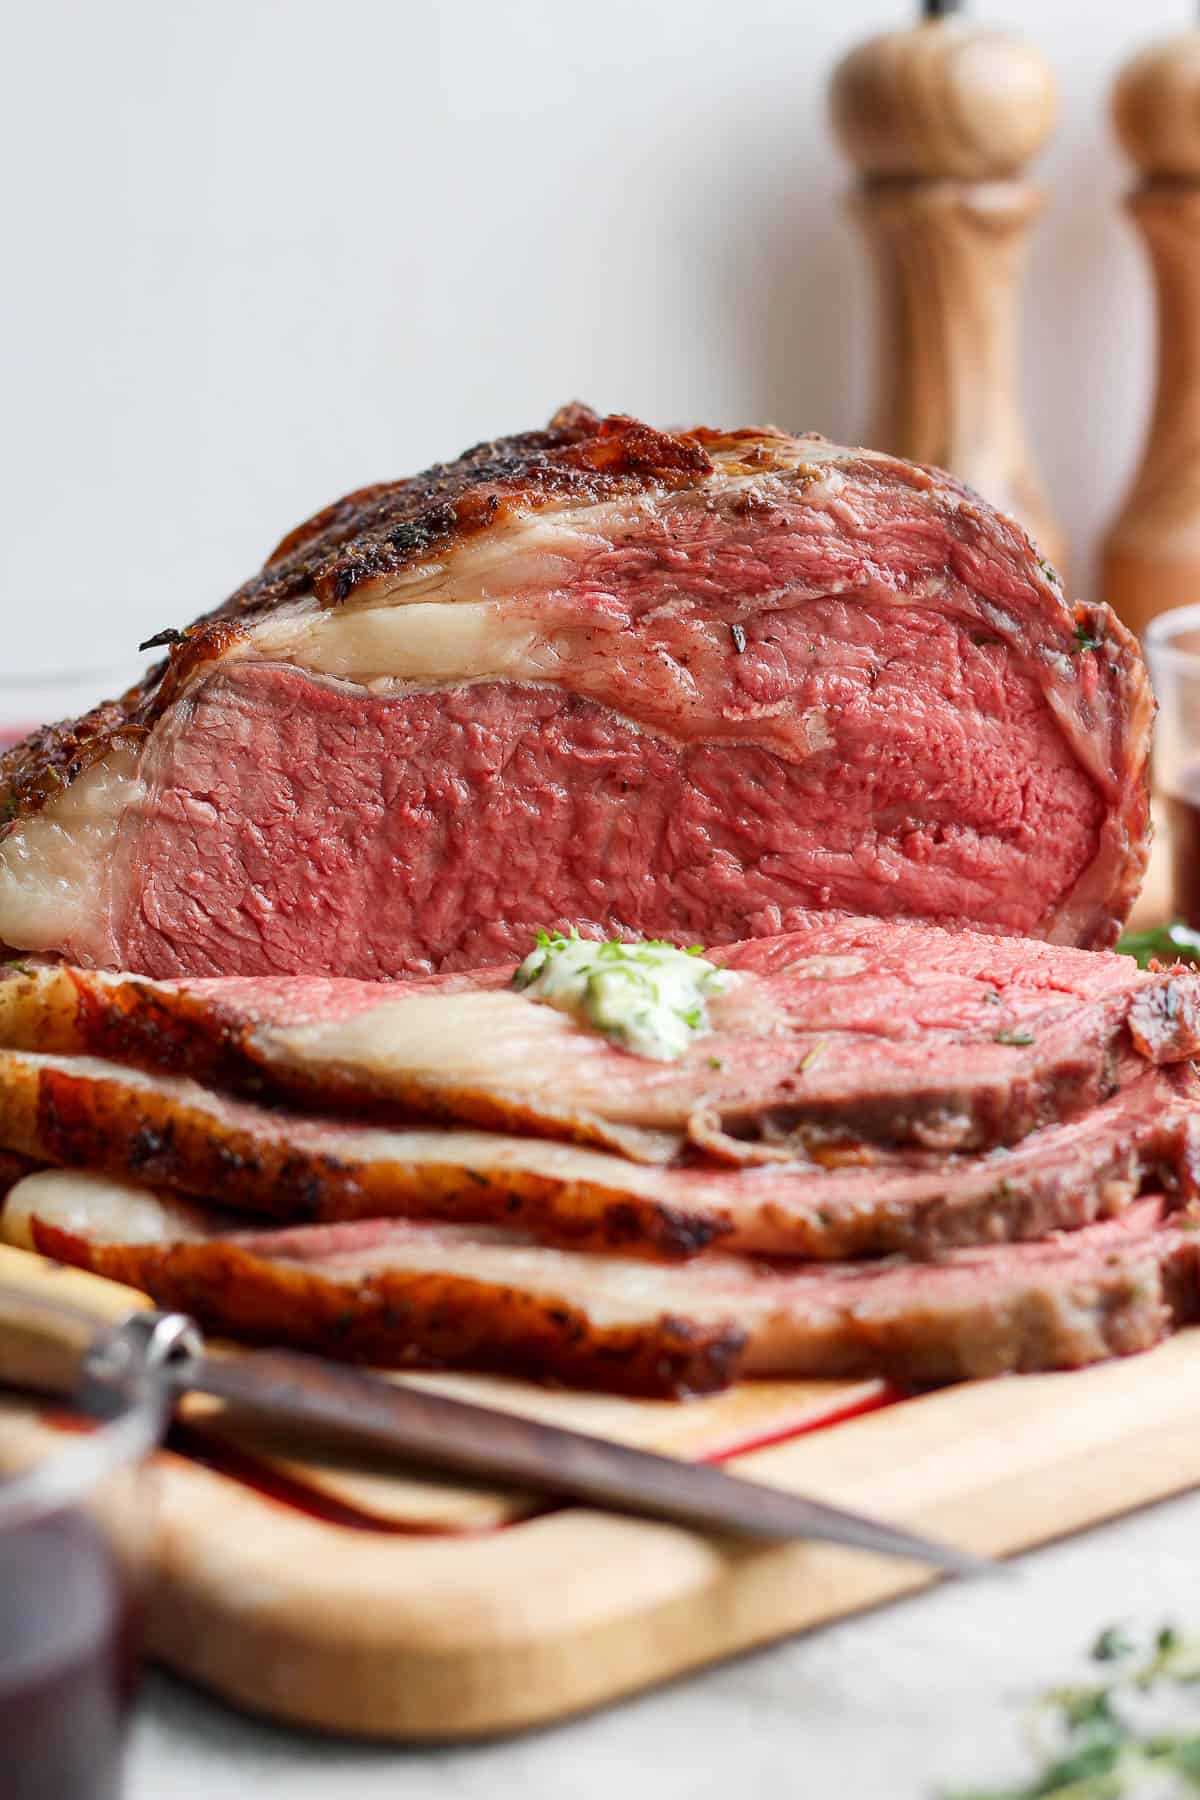 A fully cooked prime rib on a cutting board. Half of the prime rib is sliced and the other half is whole.